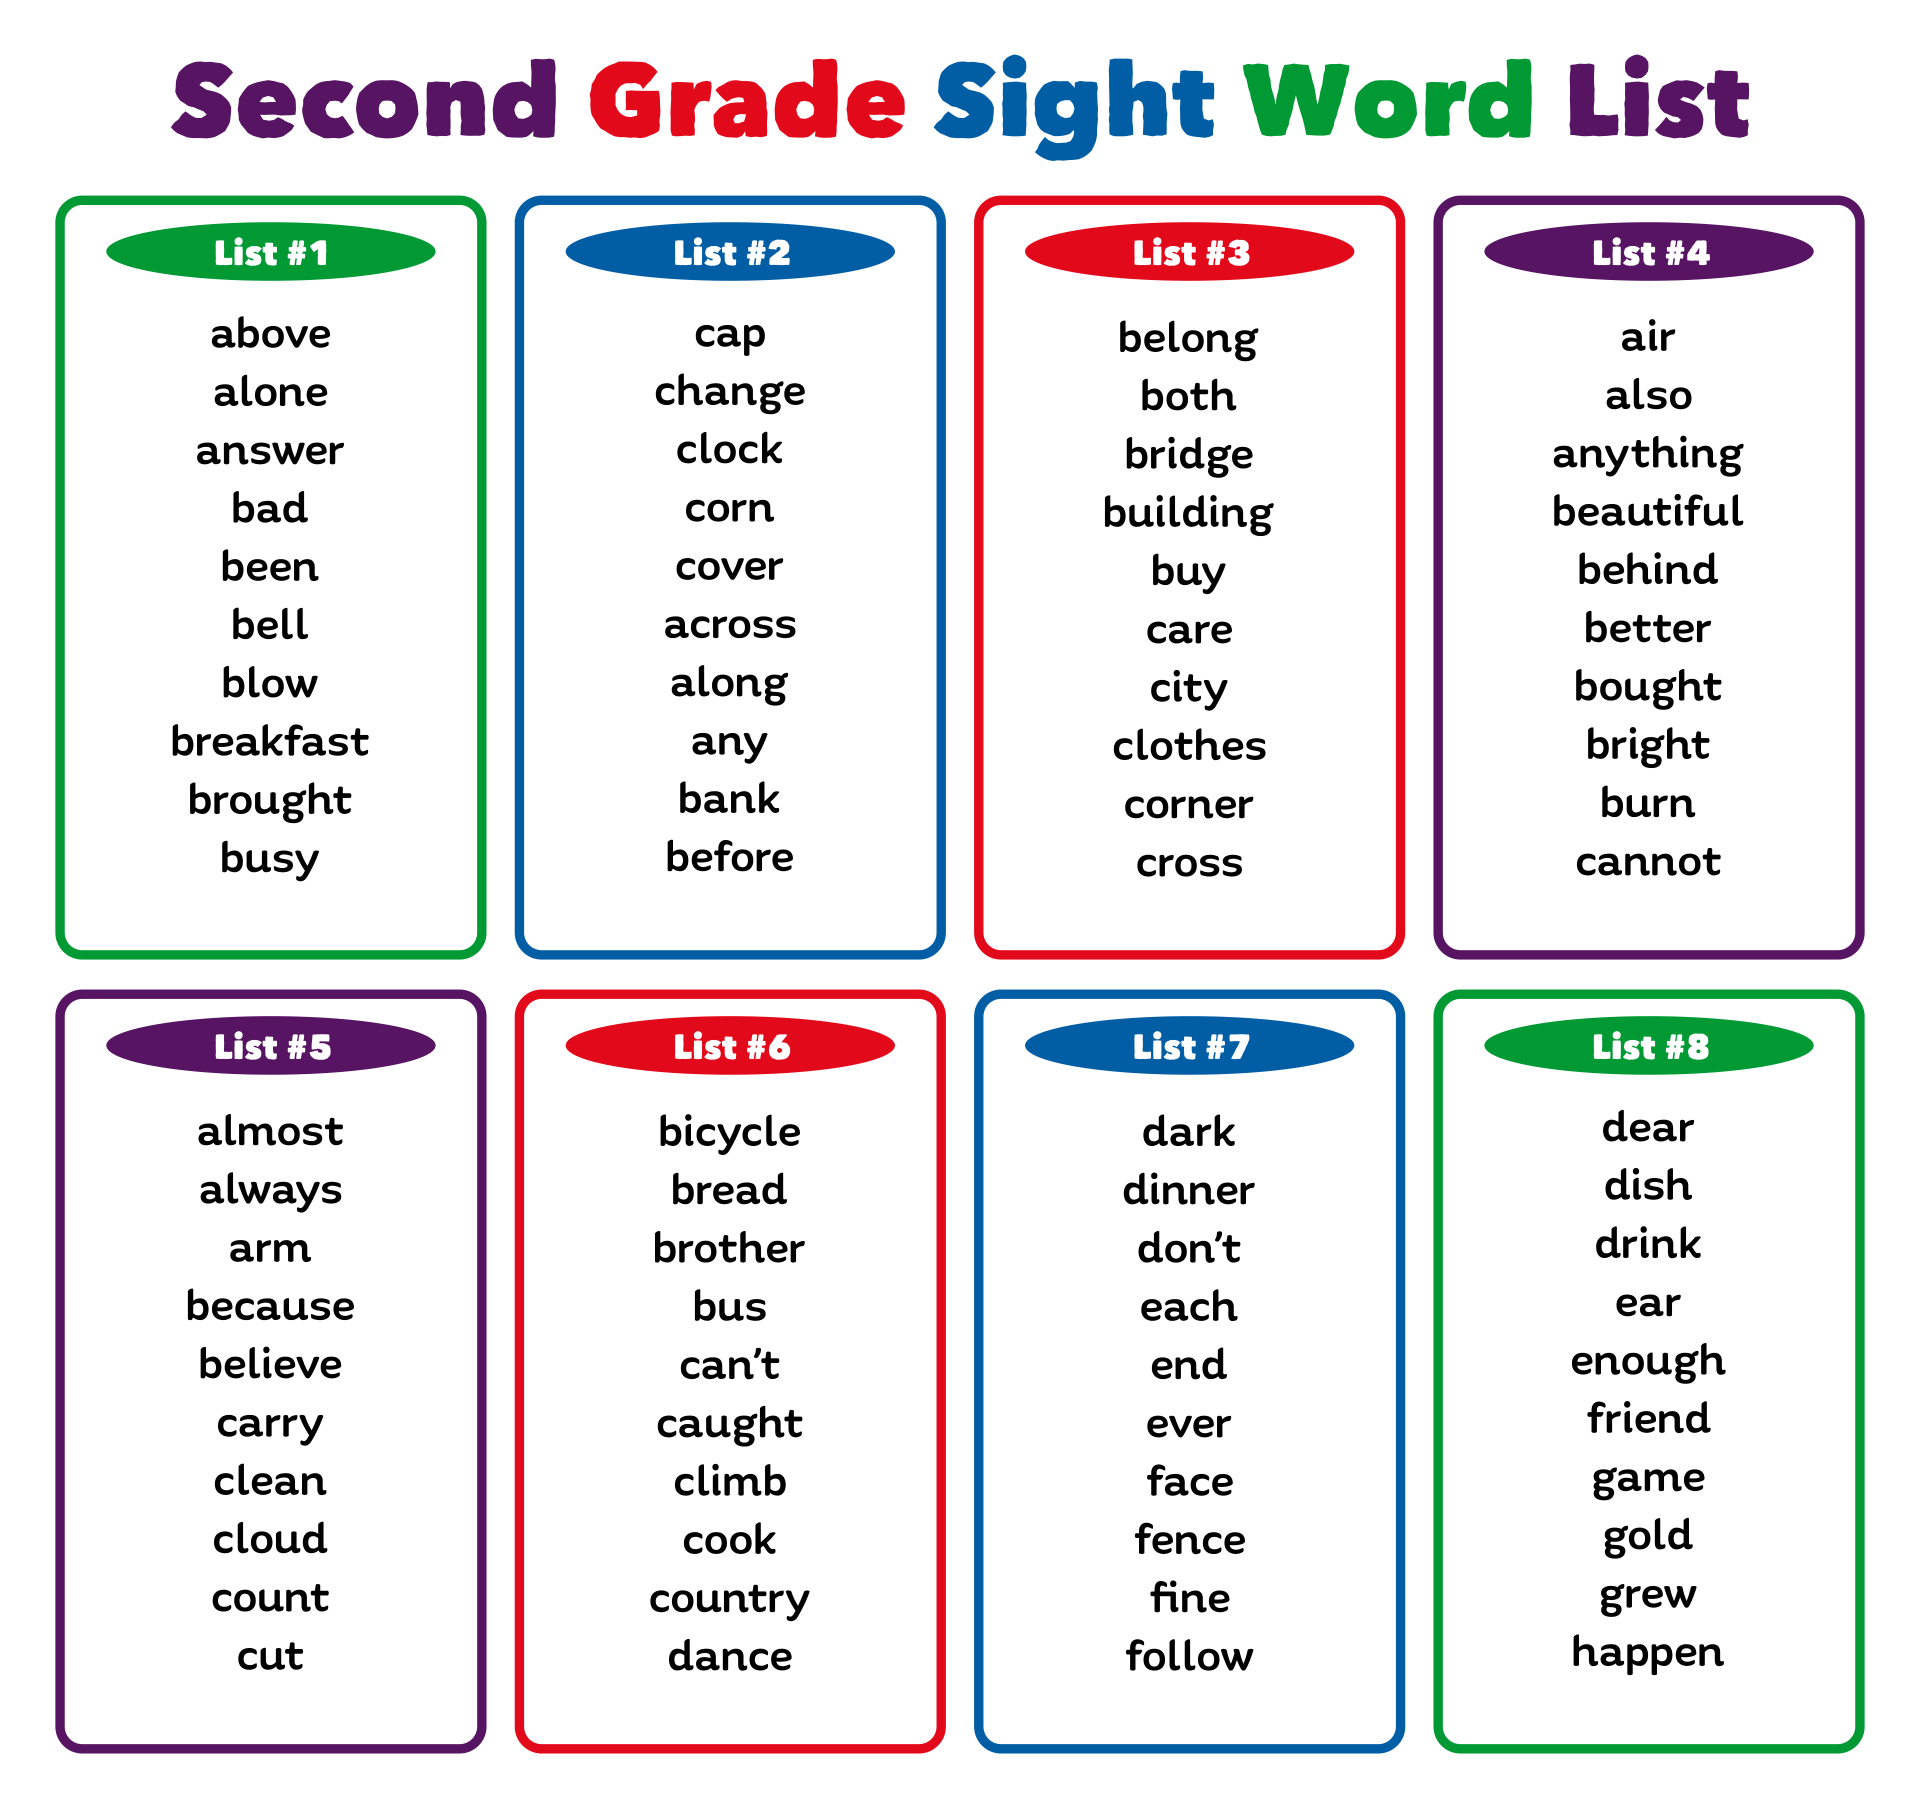 6-best-images-of-second-grade-sight-words-list-printable-2nd-grade-sight-word-list-2nd-grade